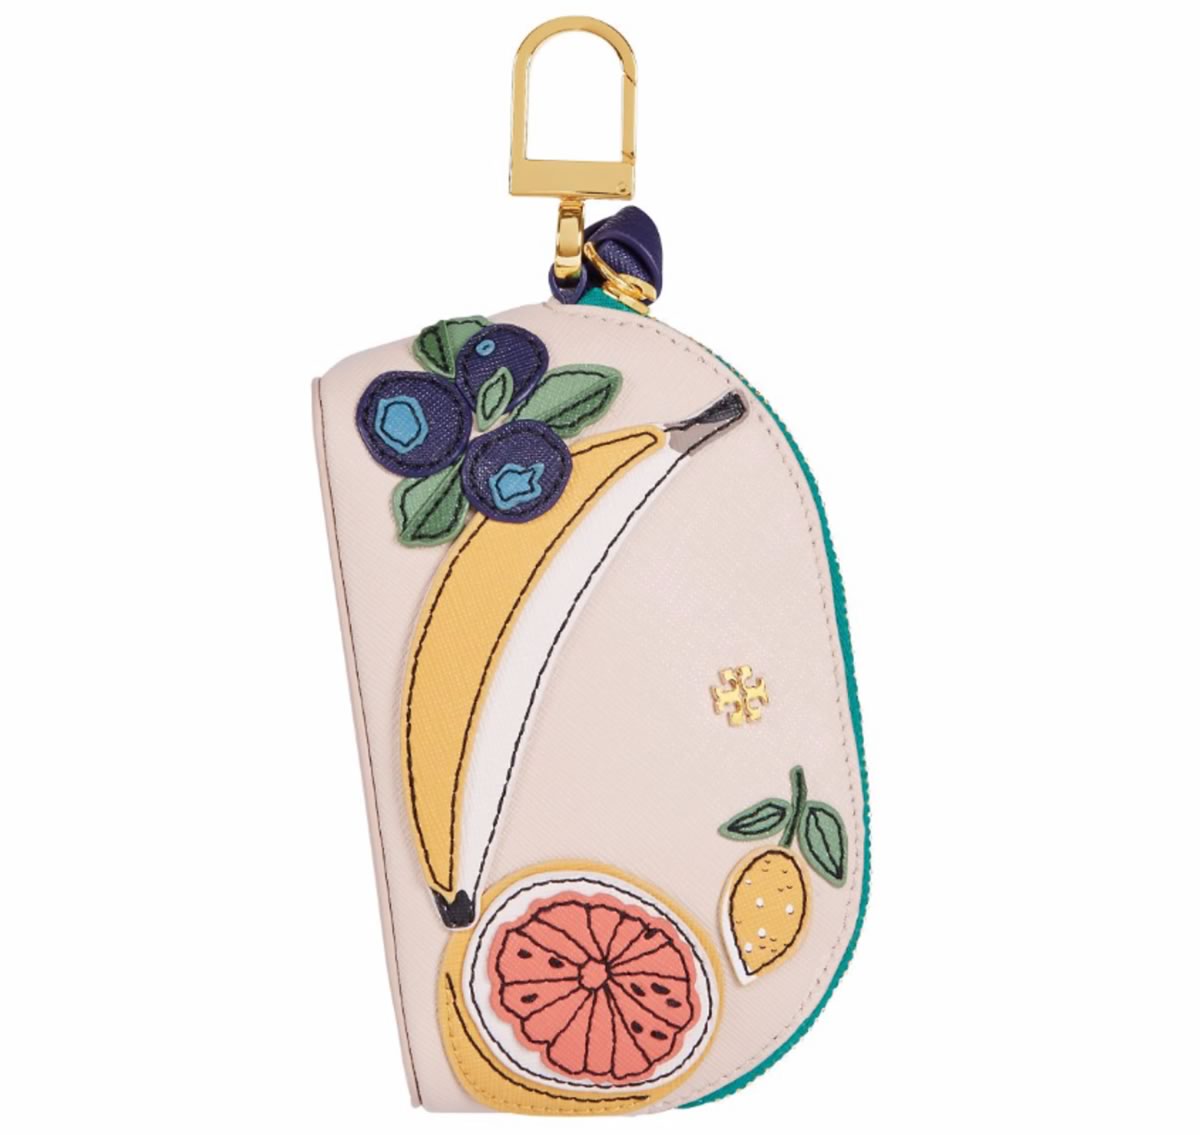 Tory Burch Domed Fruit Pouch Key Fob